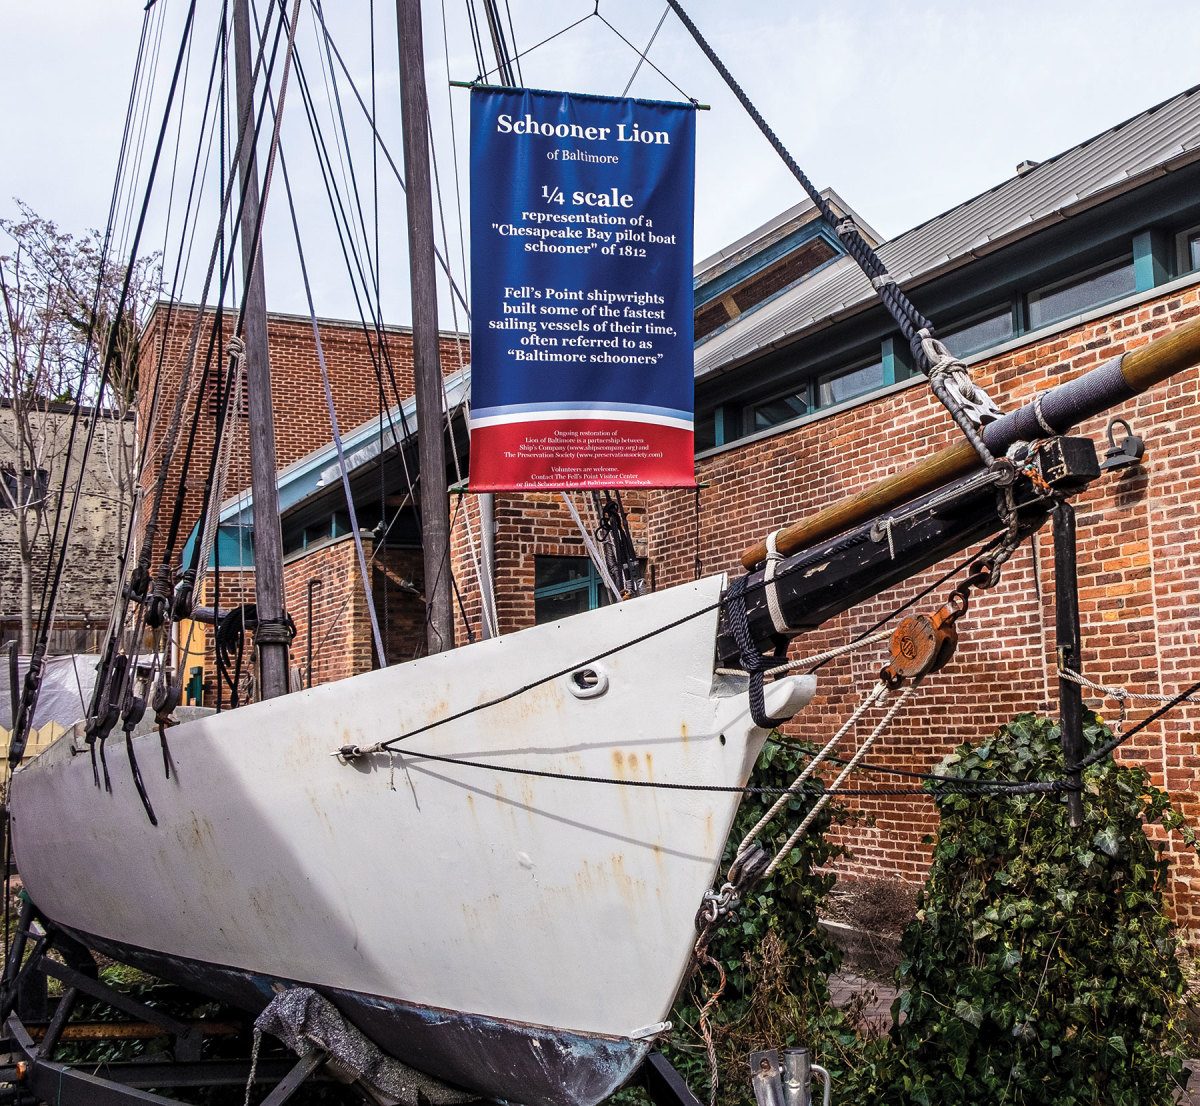 The 1/4-scale replica of the famous Baltimore Schooner Lion. After years of restoration she was launched in 2021.   